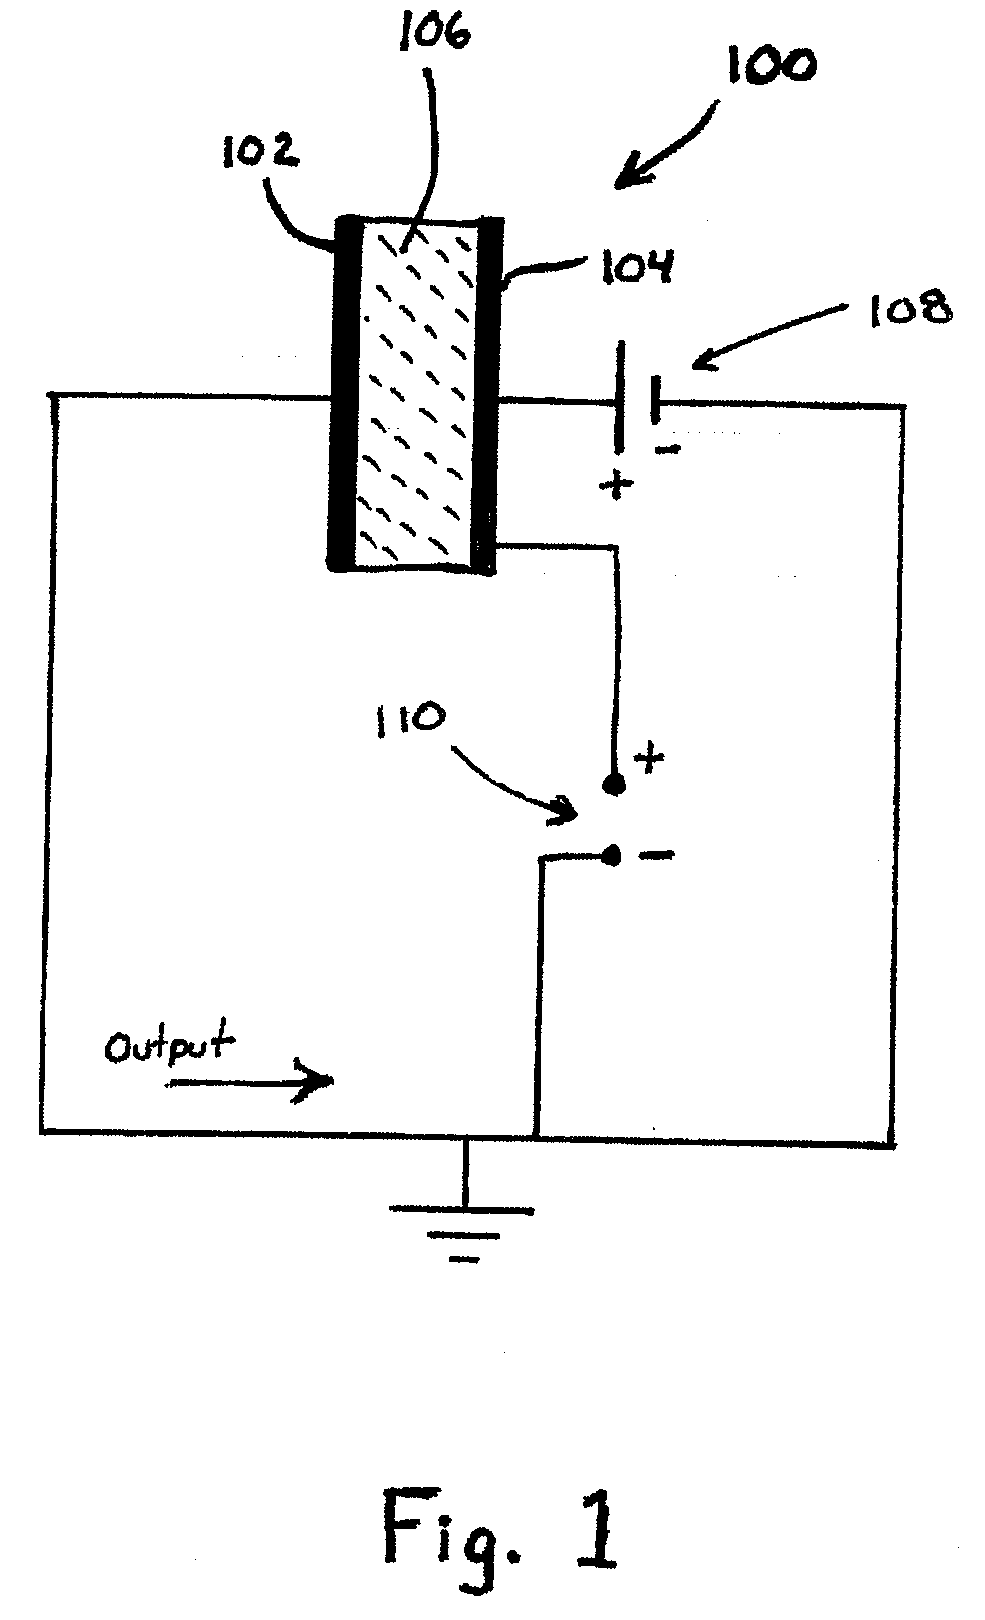 Solid state electrochemical gas sensor and method for fabricating same